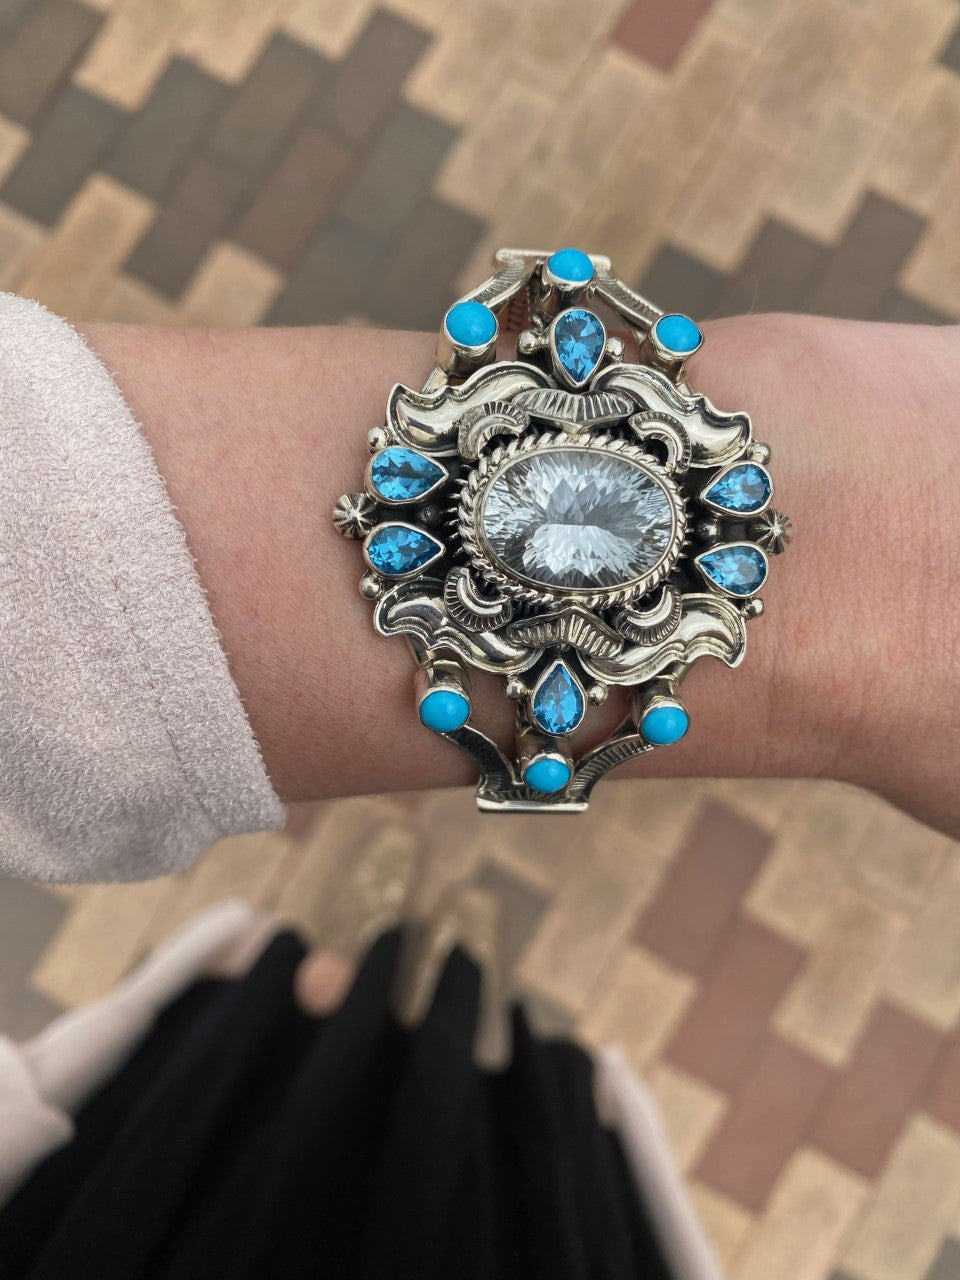 Star burst cut white topaz, swiss blue topaz, and sleeping beauty turquoise. This is a WOW piece! Created by the talented Emerson Delgarito 